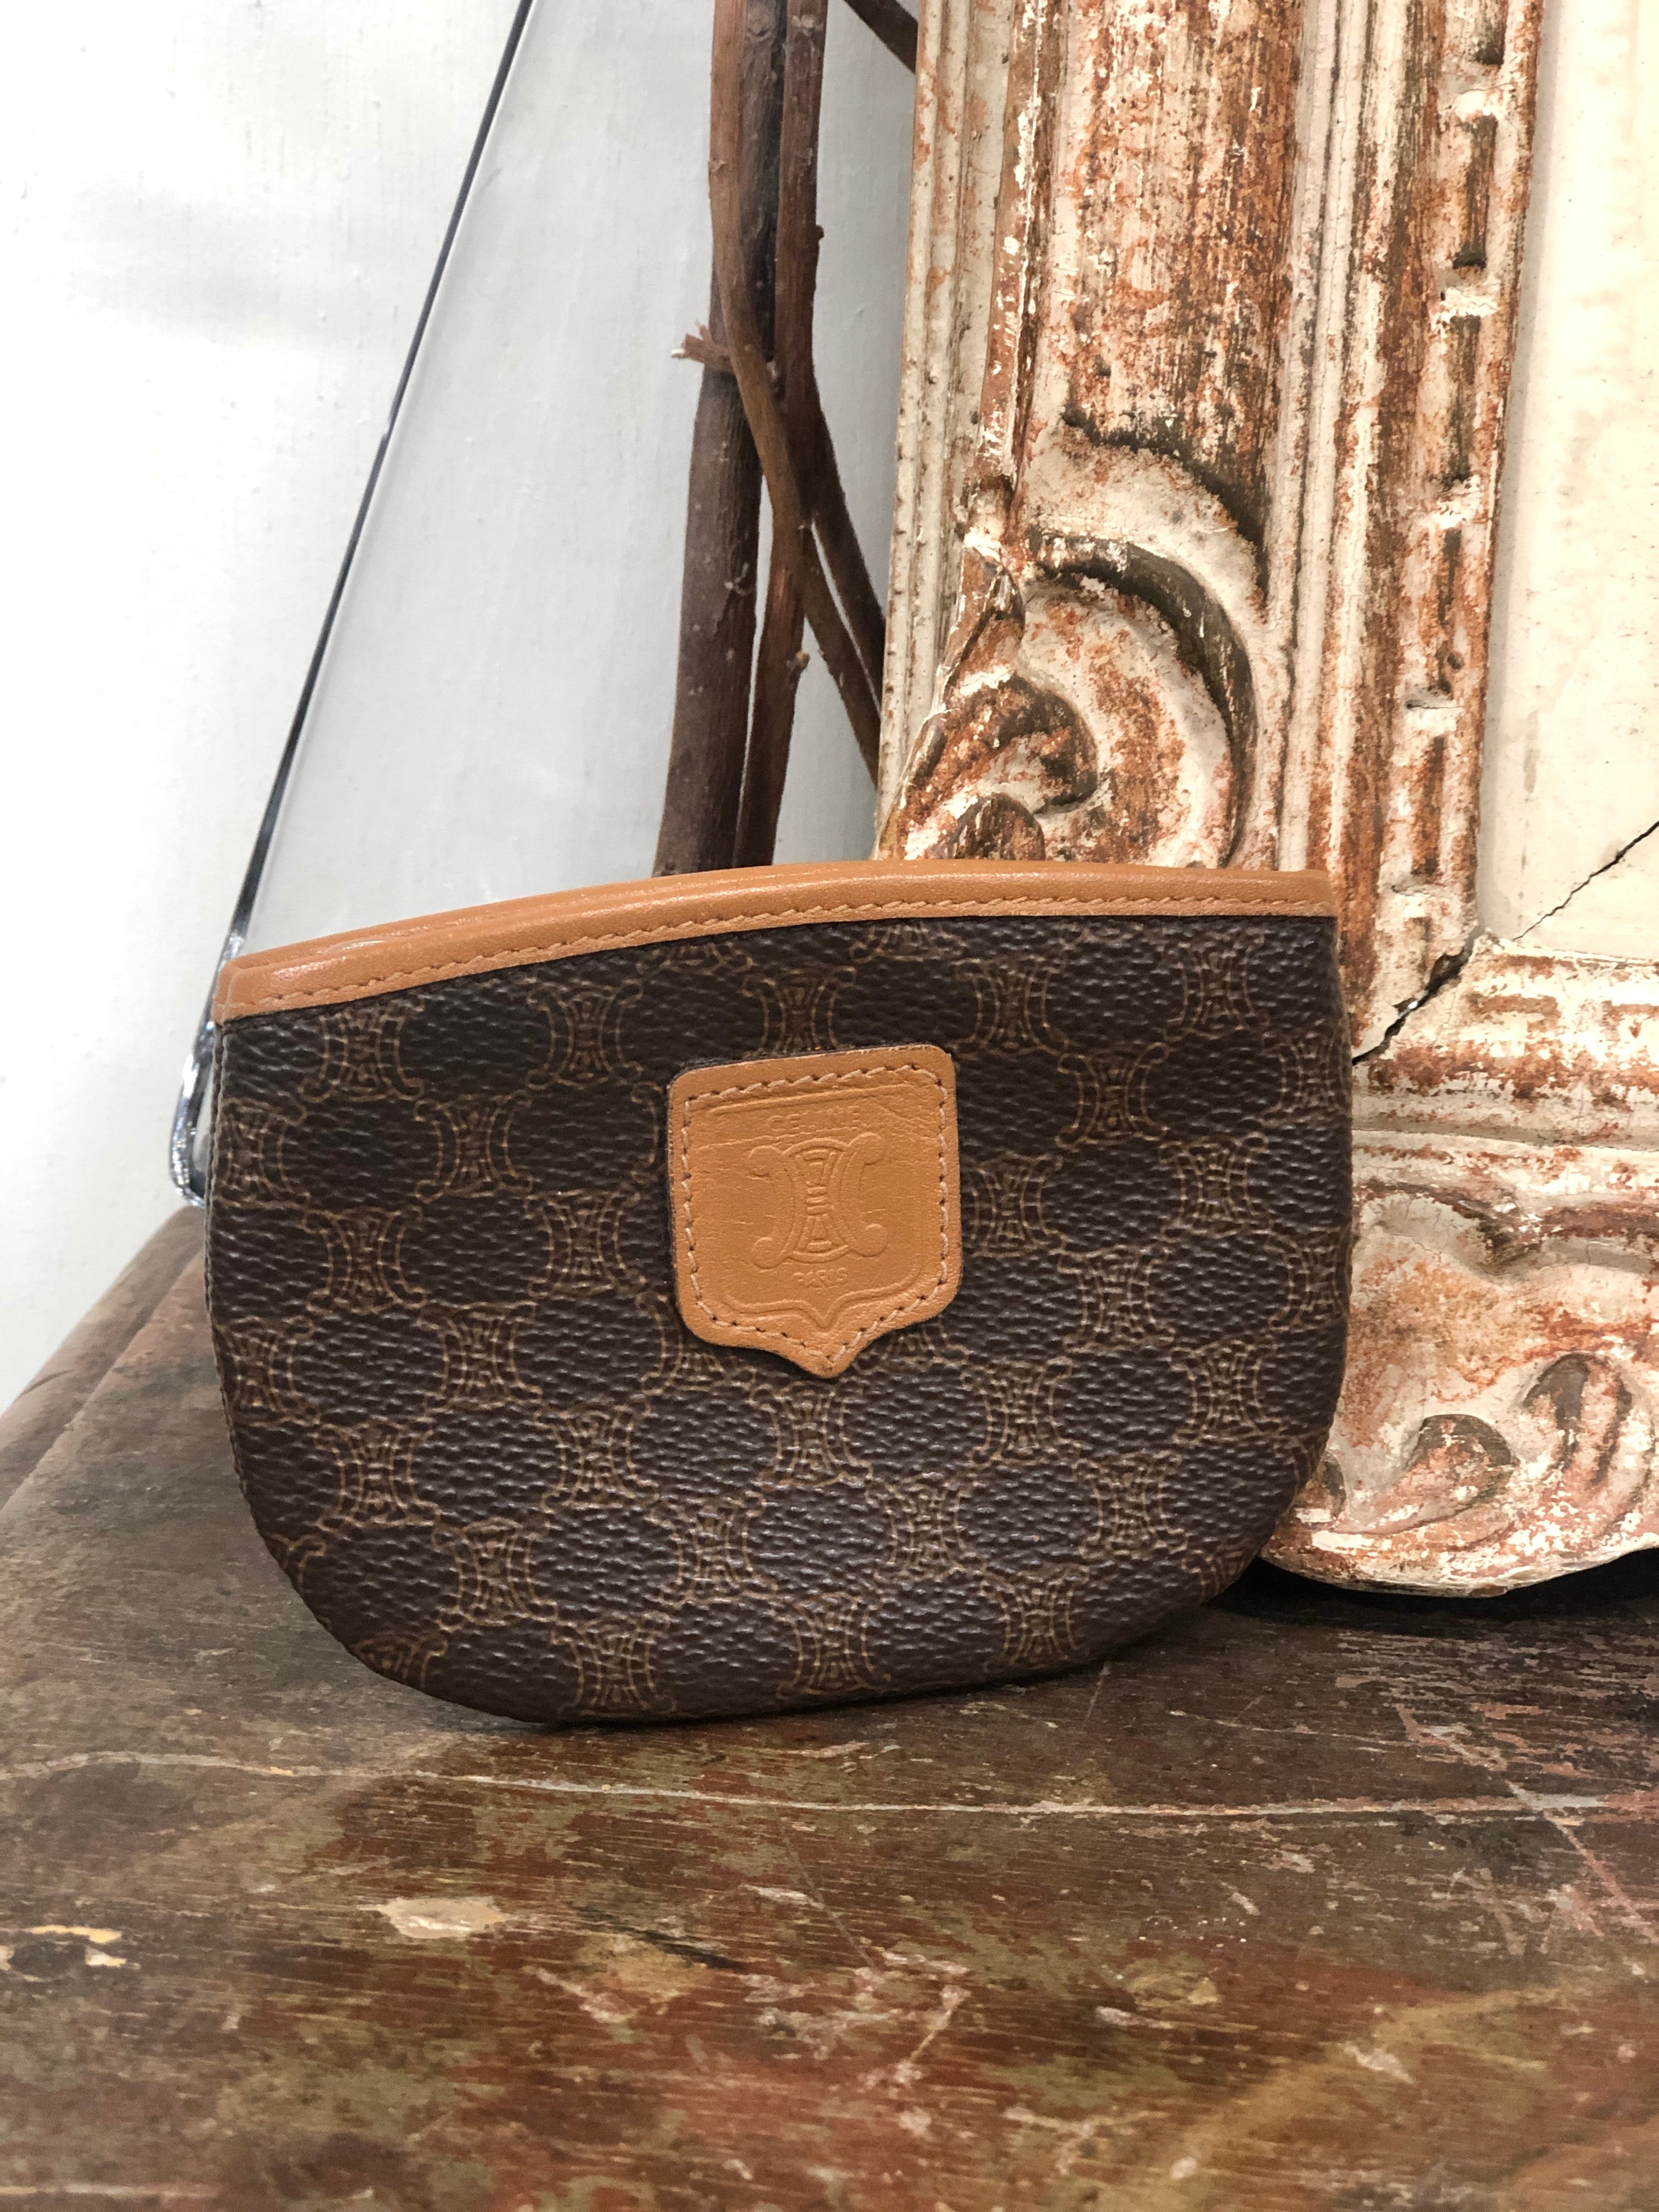 CELINE セリーヌ マカダム ブラゾン型押し コインケース ブラウン vintage ヴィンテージ オールド hxf8is |  VintageShop solo powered by BASE